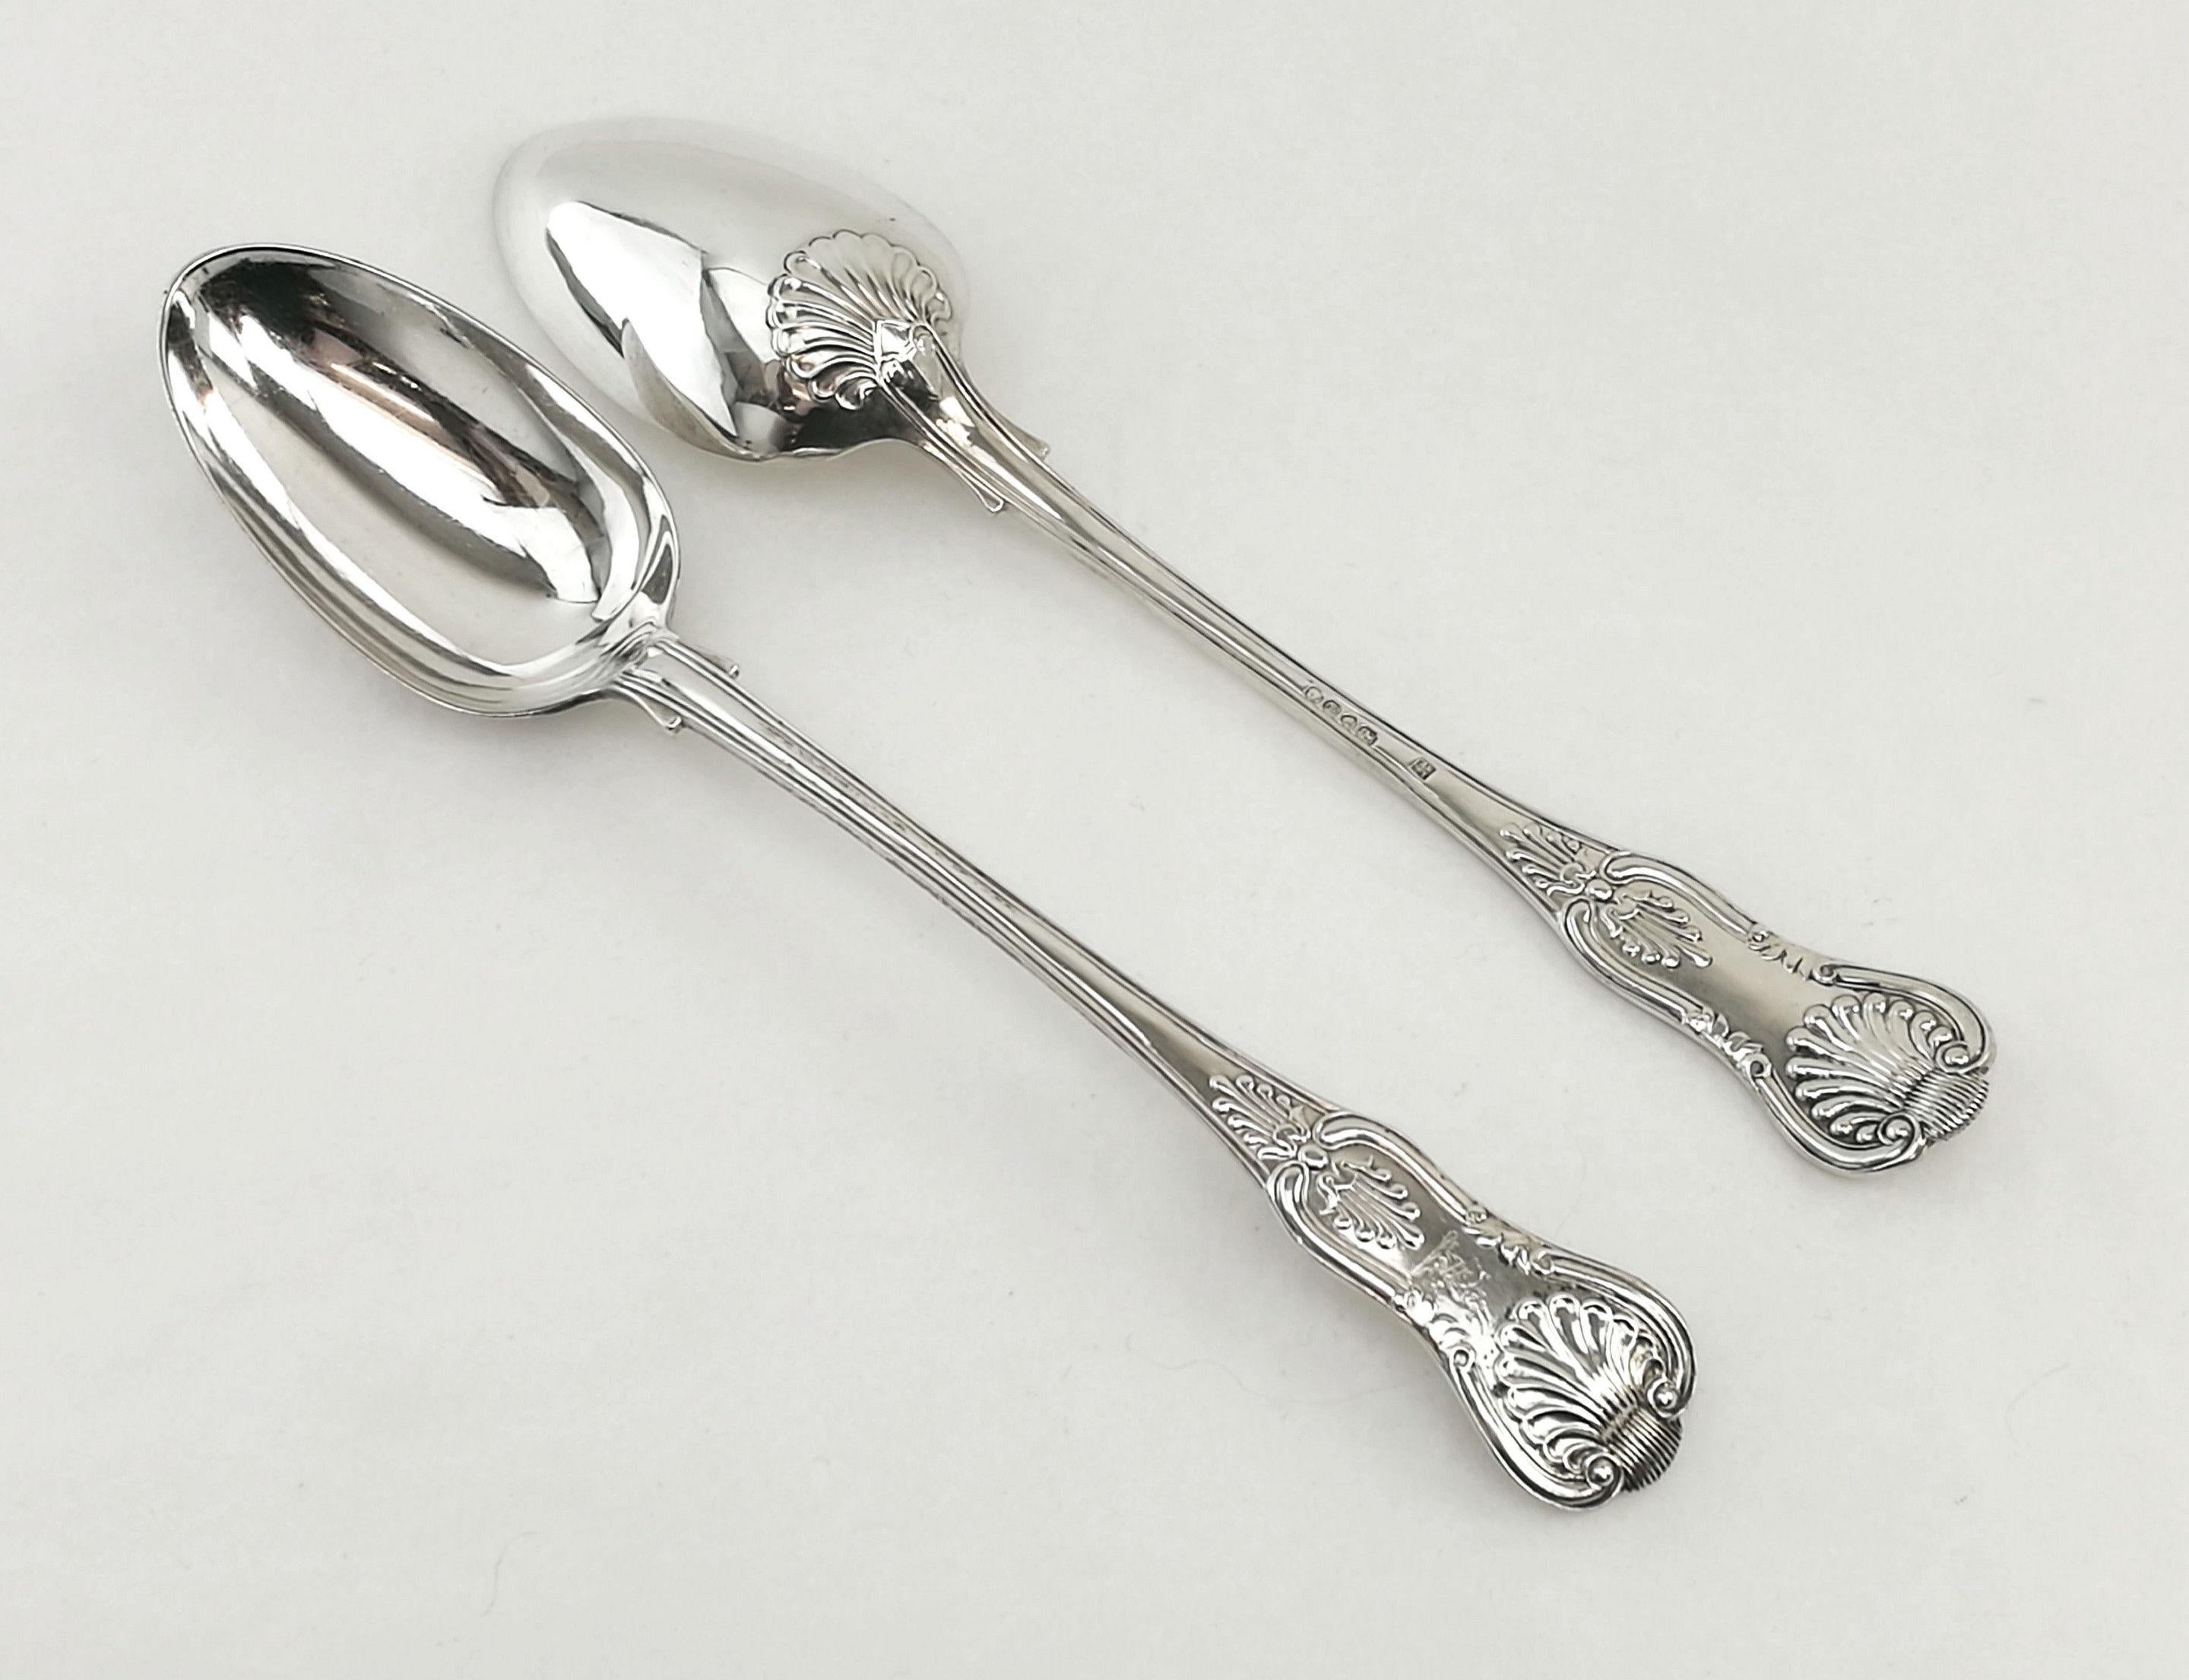 English Antique Victorian Solid Silver Serving Spoons/Stuffing Spoons London 1838, Pair